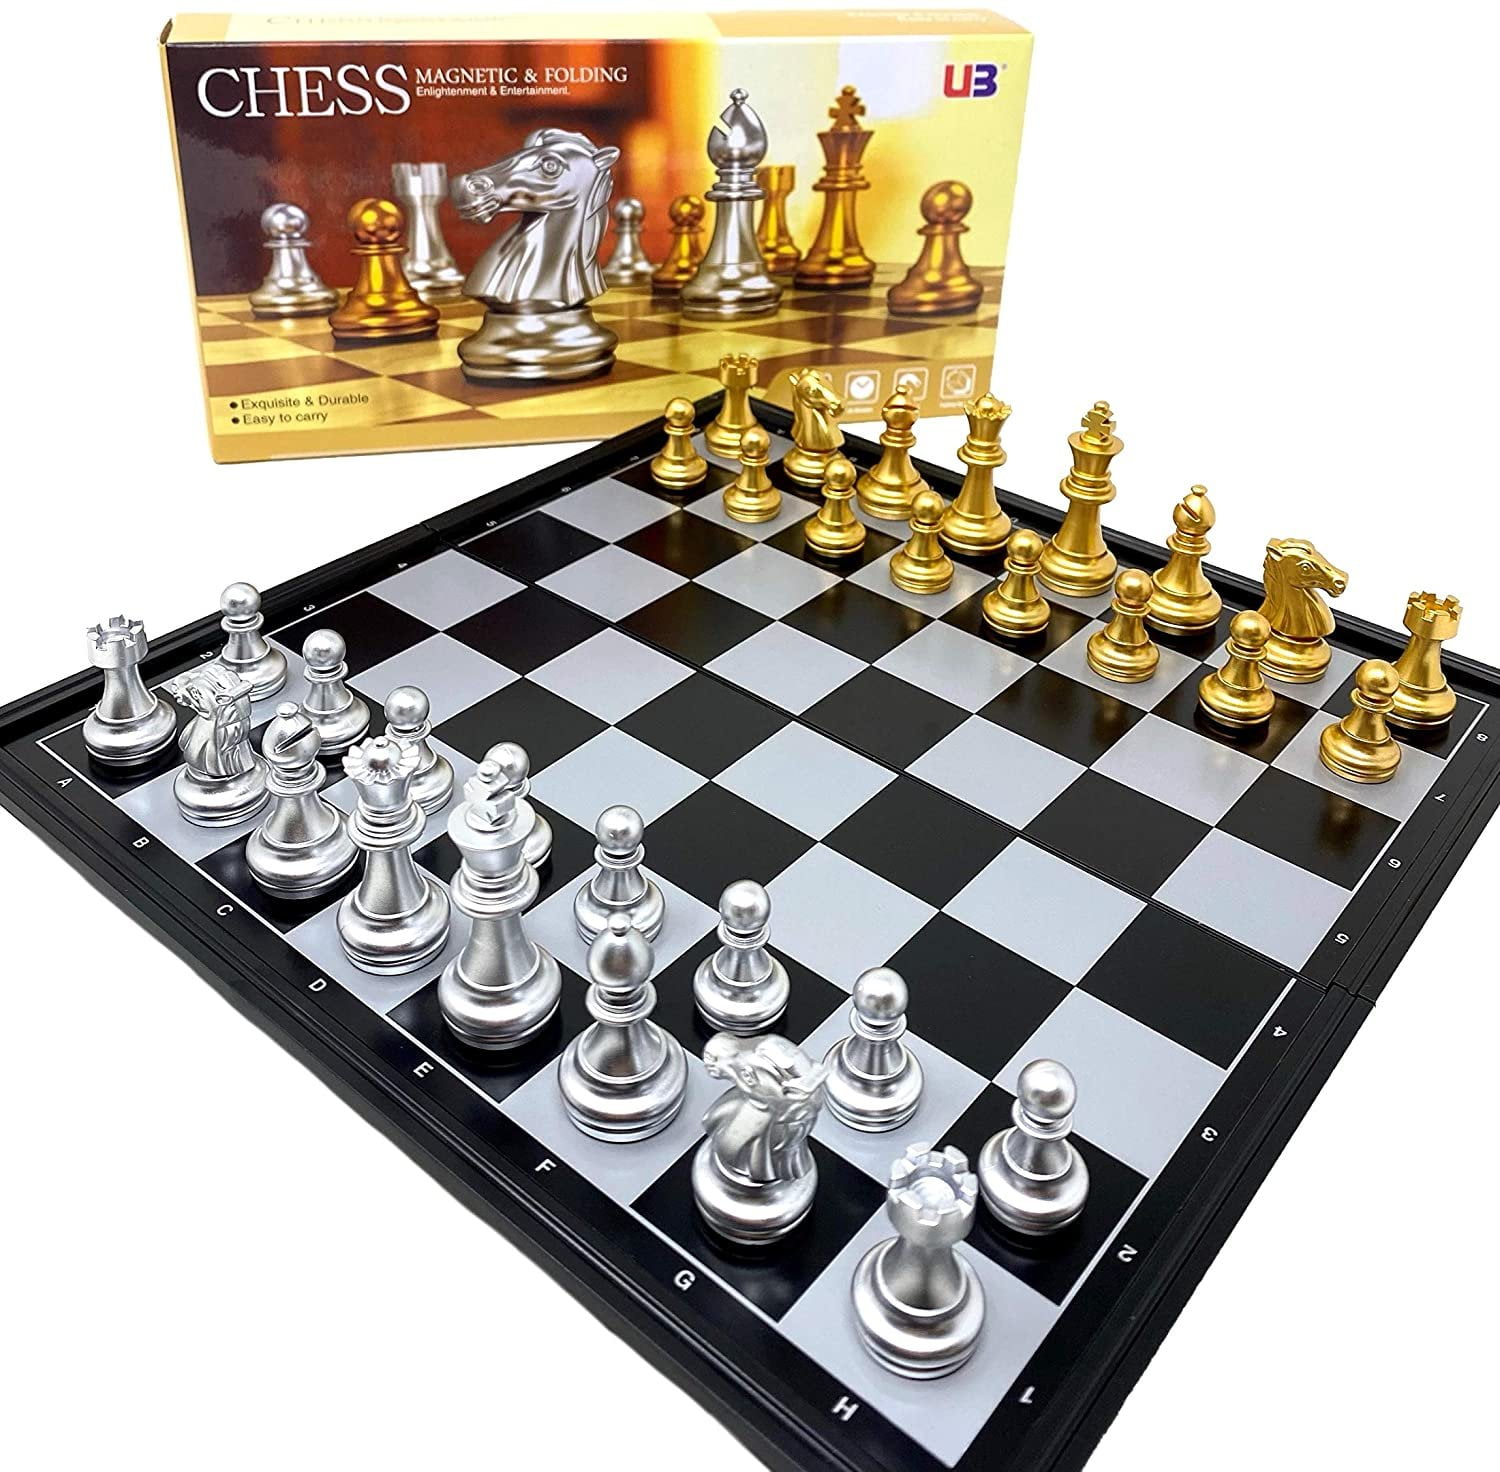 Chess Board set Folding Large Magnetic Chessboard Gift Toy Travel game foldable 